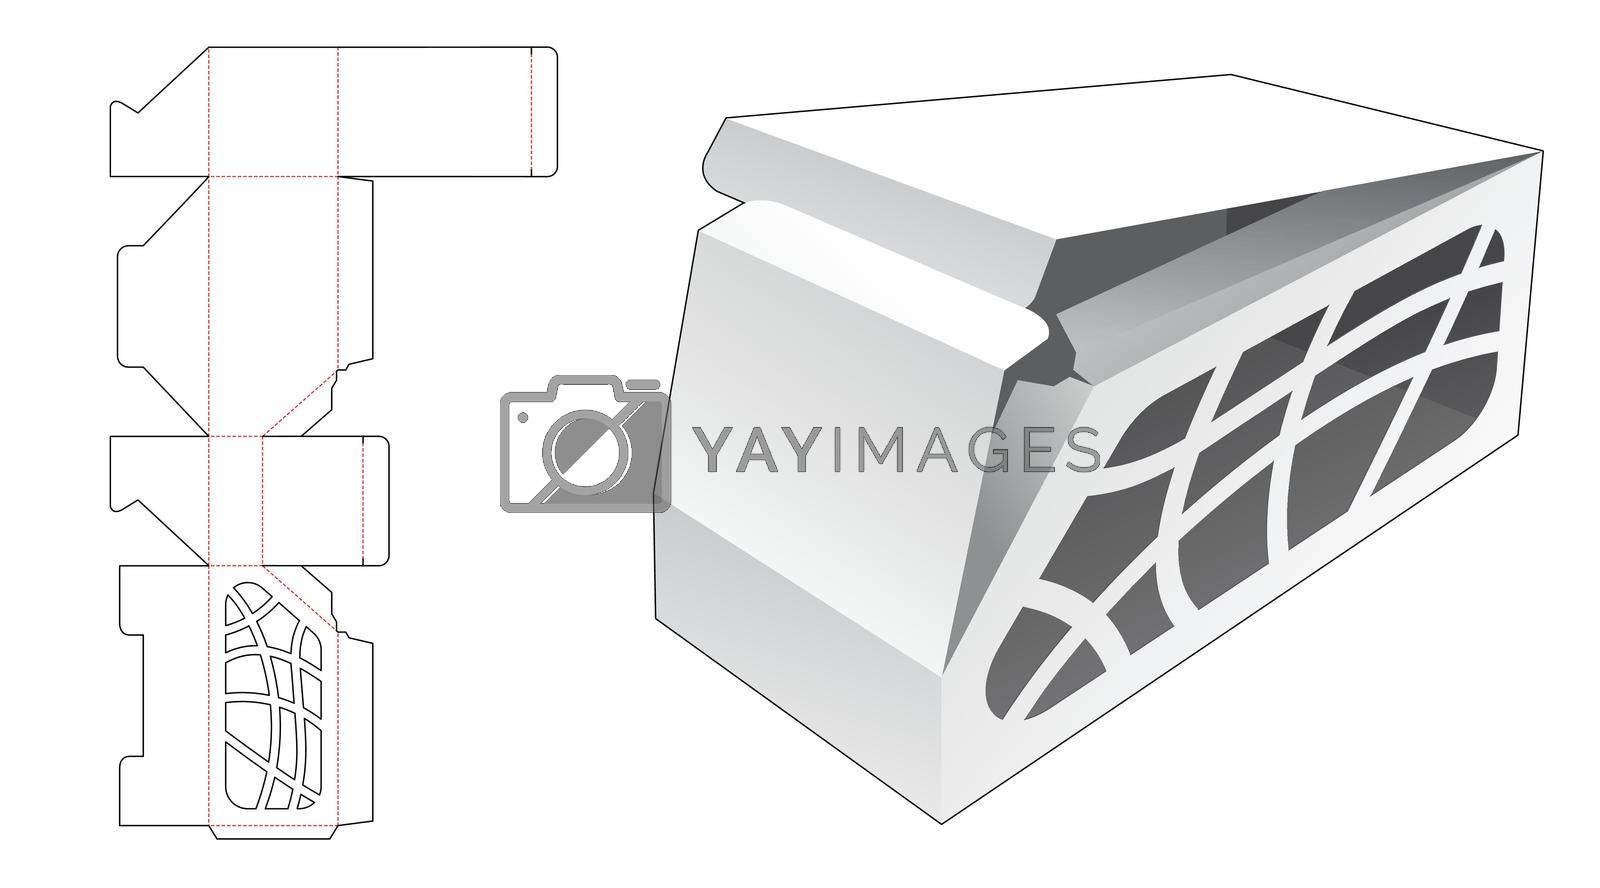 Royalty free image of 2 flips angle box with abstract window die cut template by valueinvestor